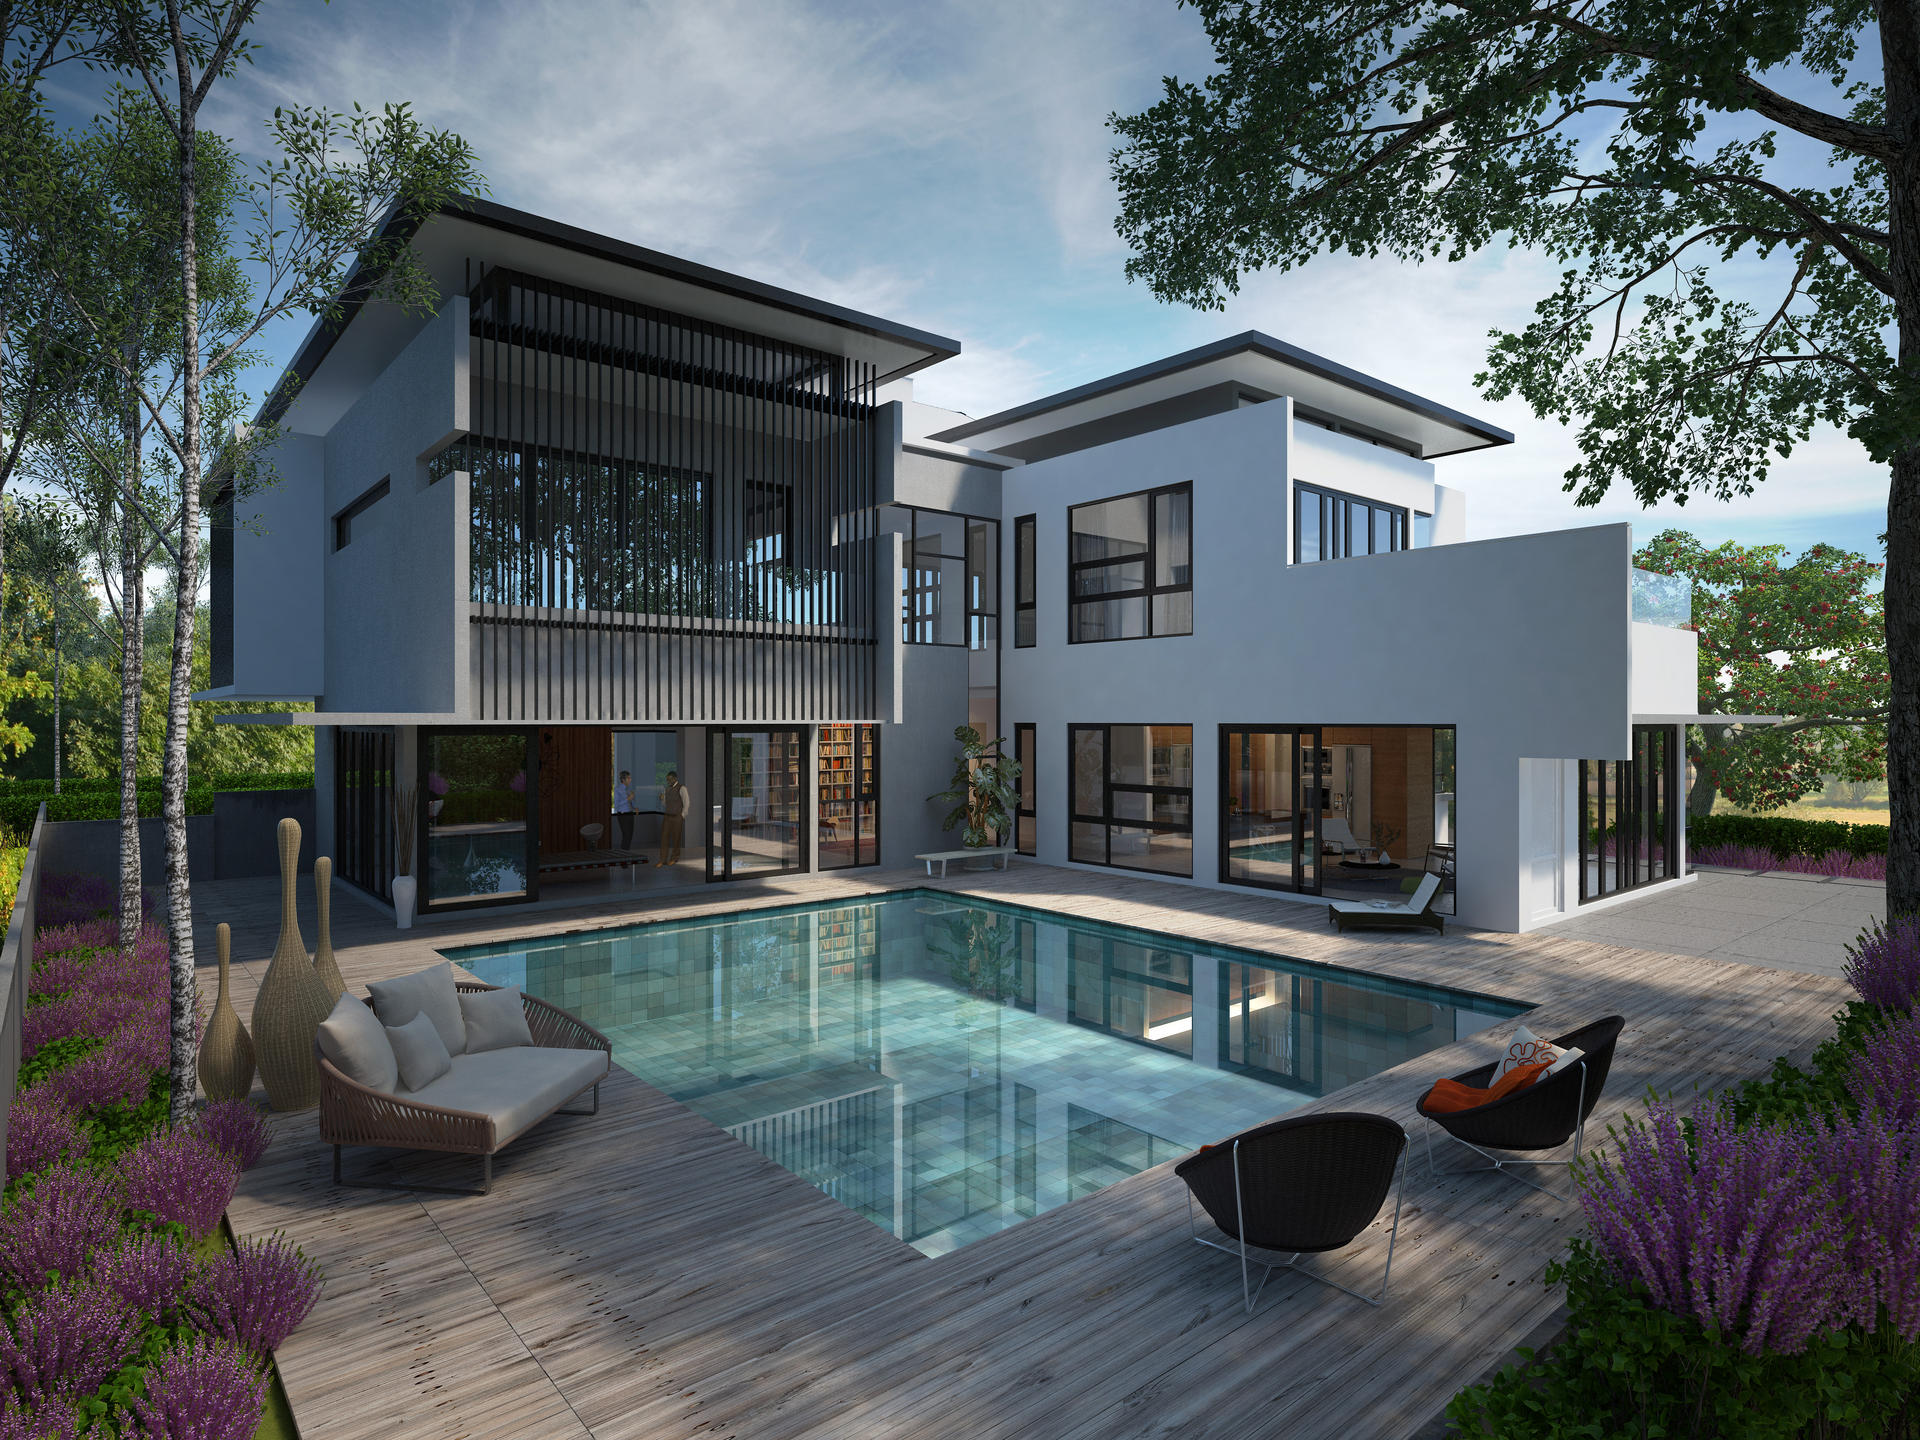 Luxury living is on offer in Noble Park, part of the East Ledang district in Iskandar being developed by UEM Land. Photo: SCMP